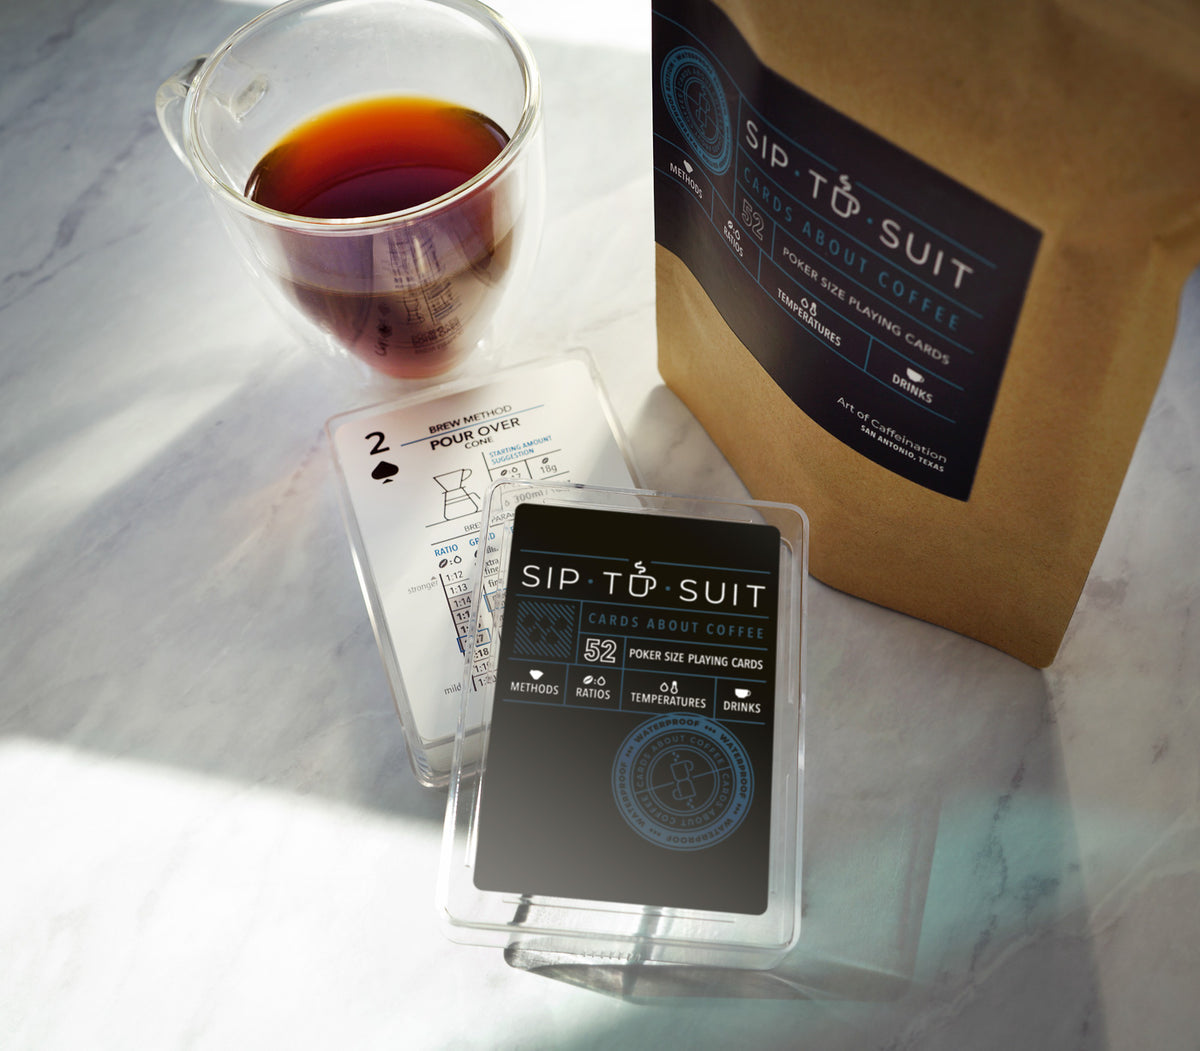 SIP-TO-SUIT Cards About Coffee Waterproof Edition Deck | Art of Caffeination - Wake Concept Store  